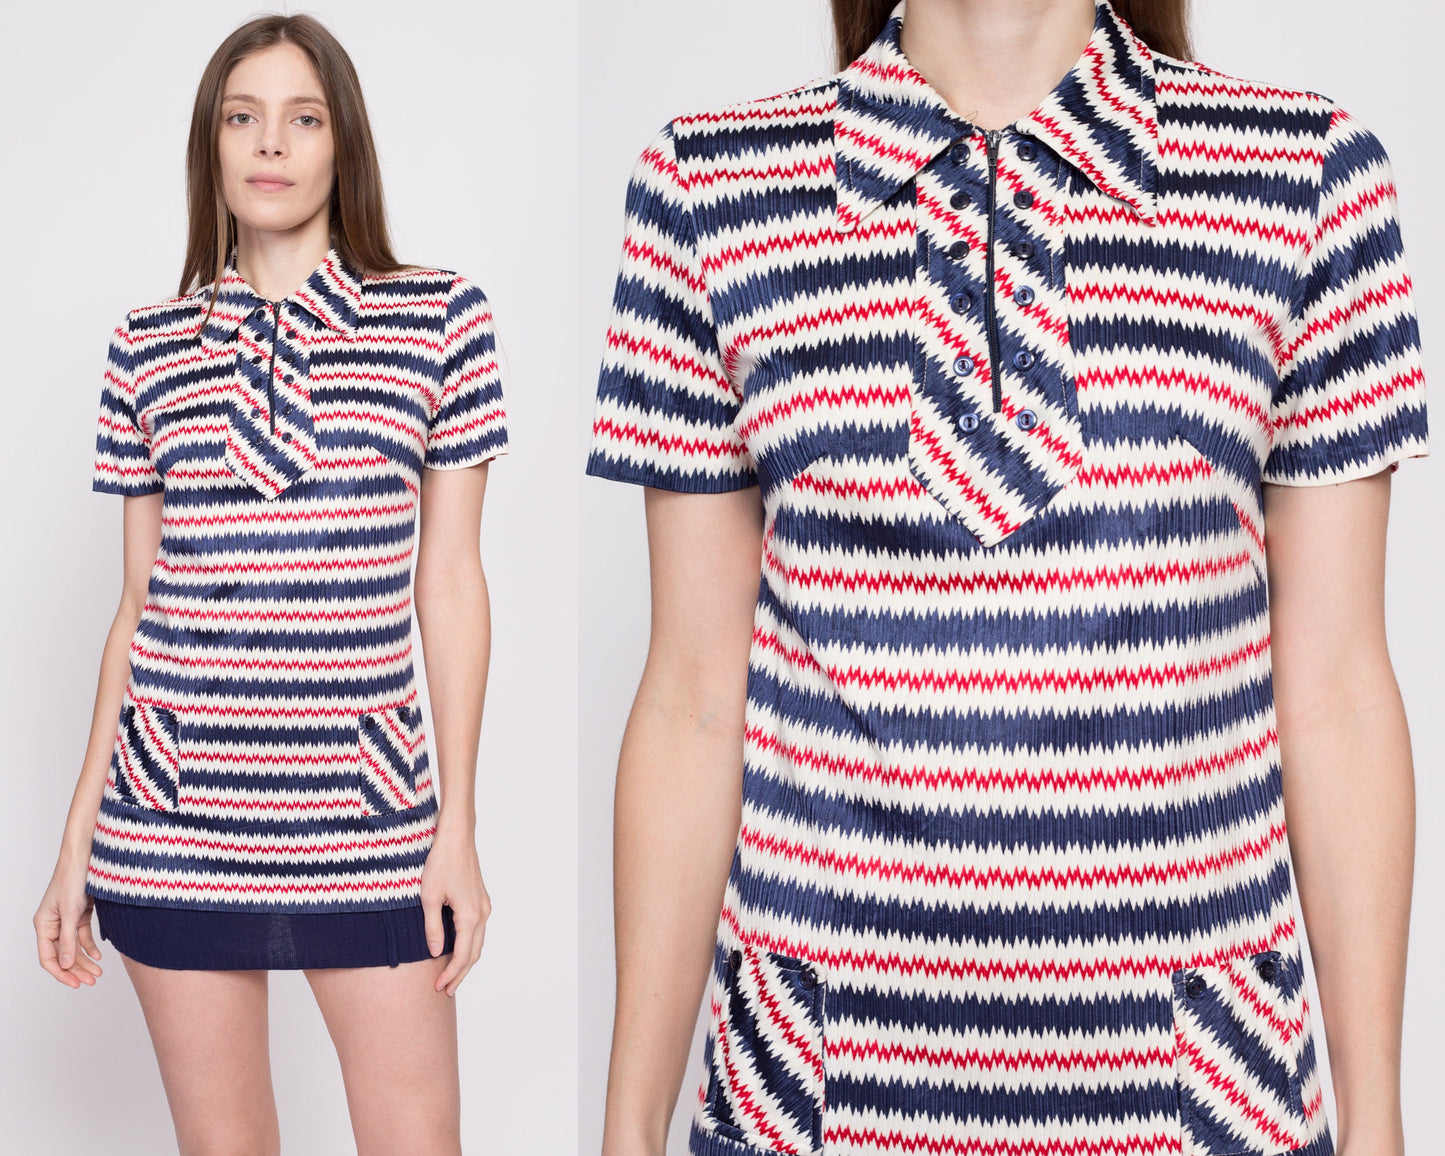 60s 70s Mod Flame Stitch Top - Medium | Vintage Red White Blue Zig Zag Striped Collared Tunic Shirt